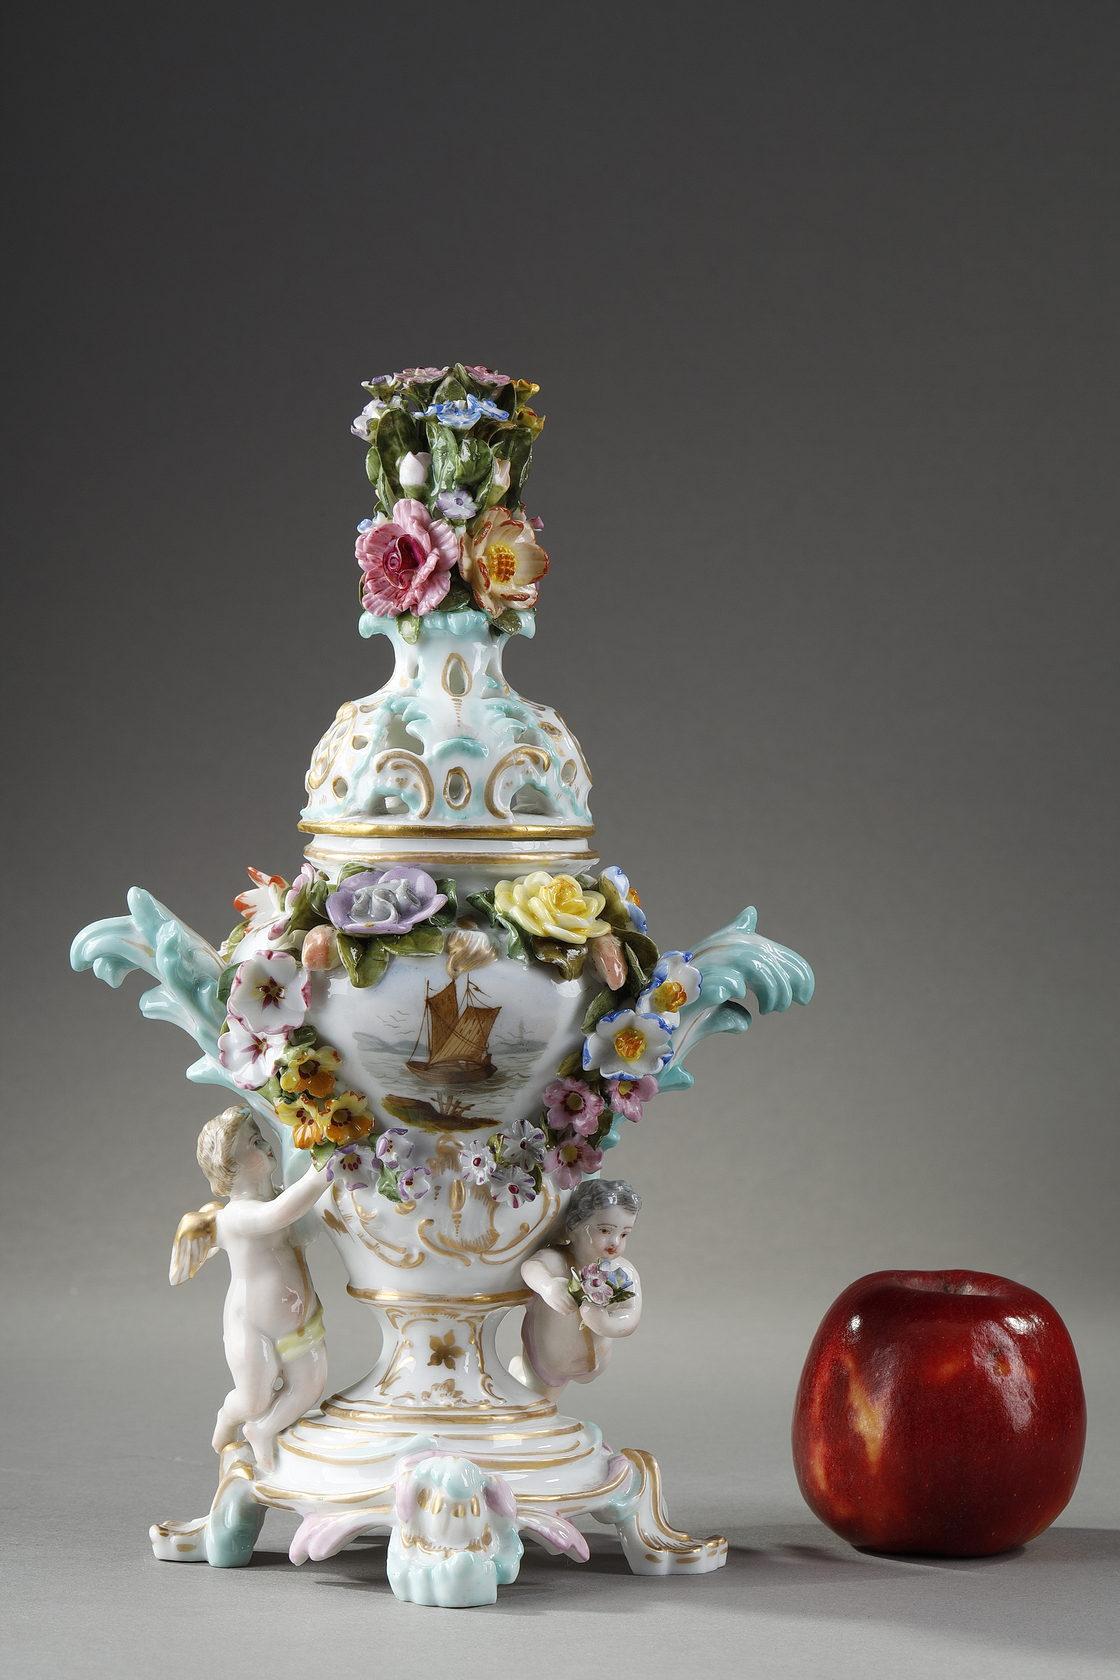 Meissen polychrome and gilt porcelain potpourri. It takes the form of a vase with an openwork lid topped by a bouquet of porcelain flowers. The body, flanked by two moving handles, is decorated with a ship and flowers in relief. The foot is animated